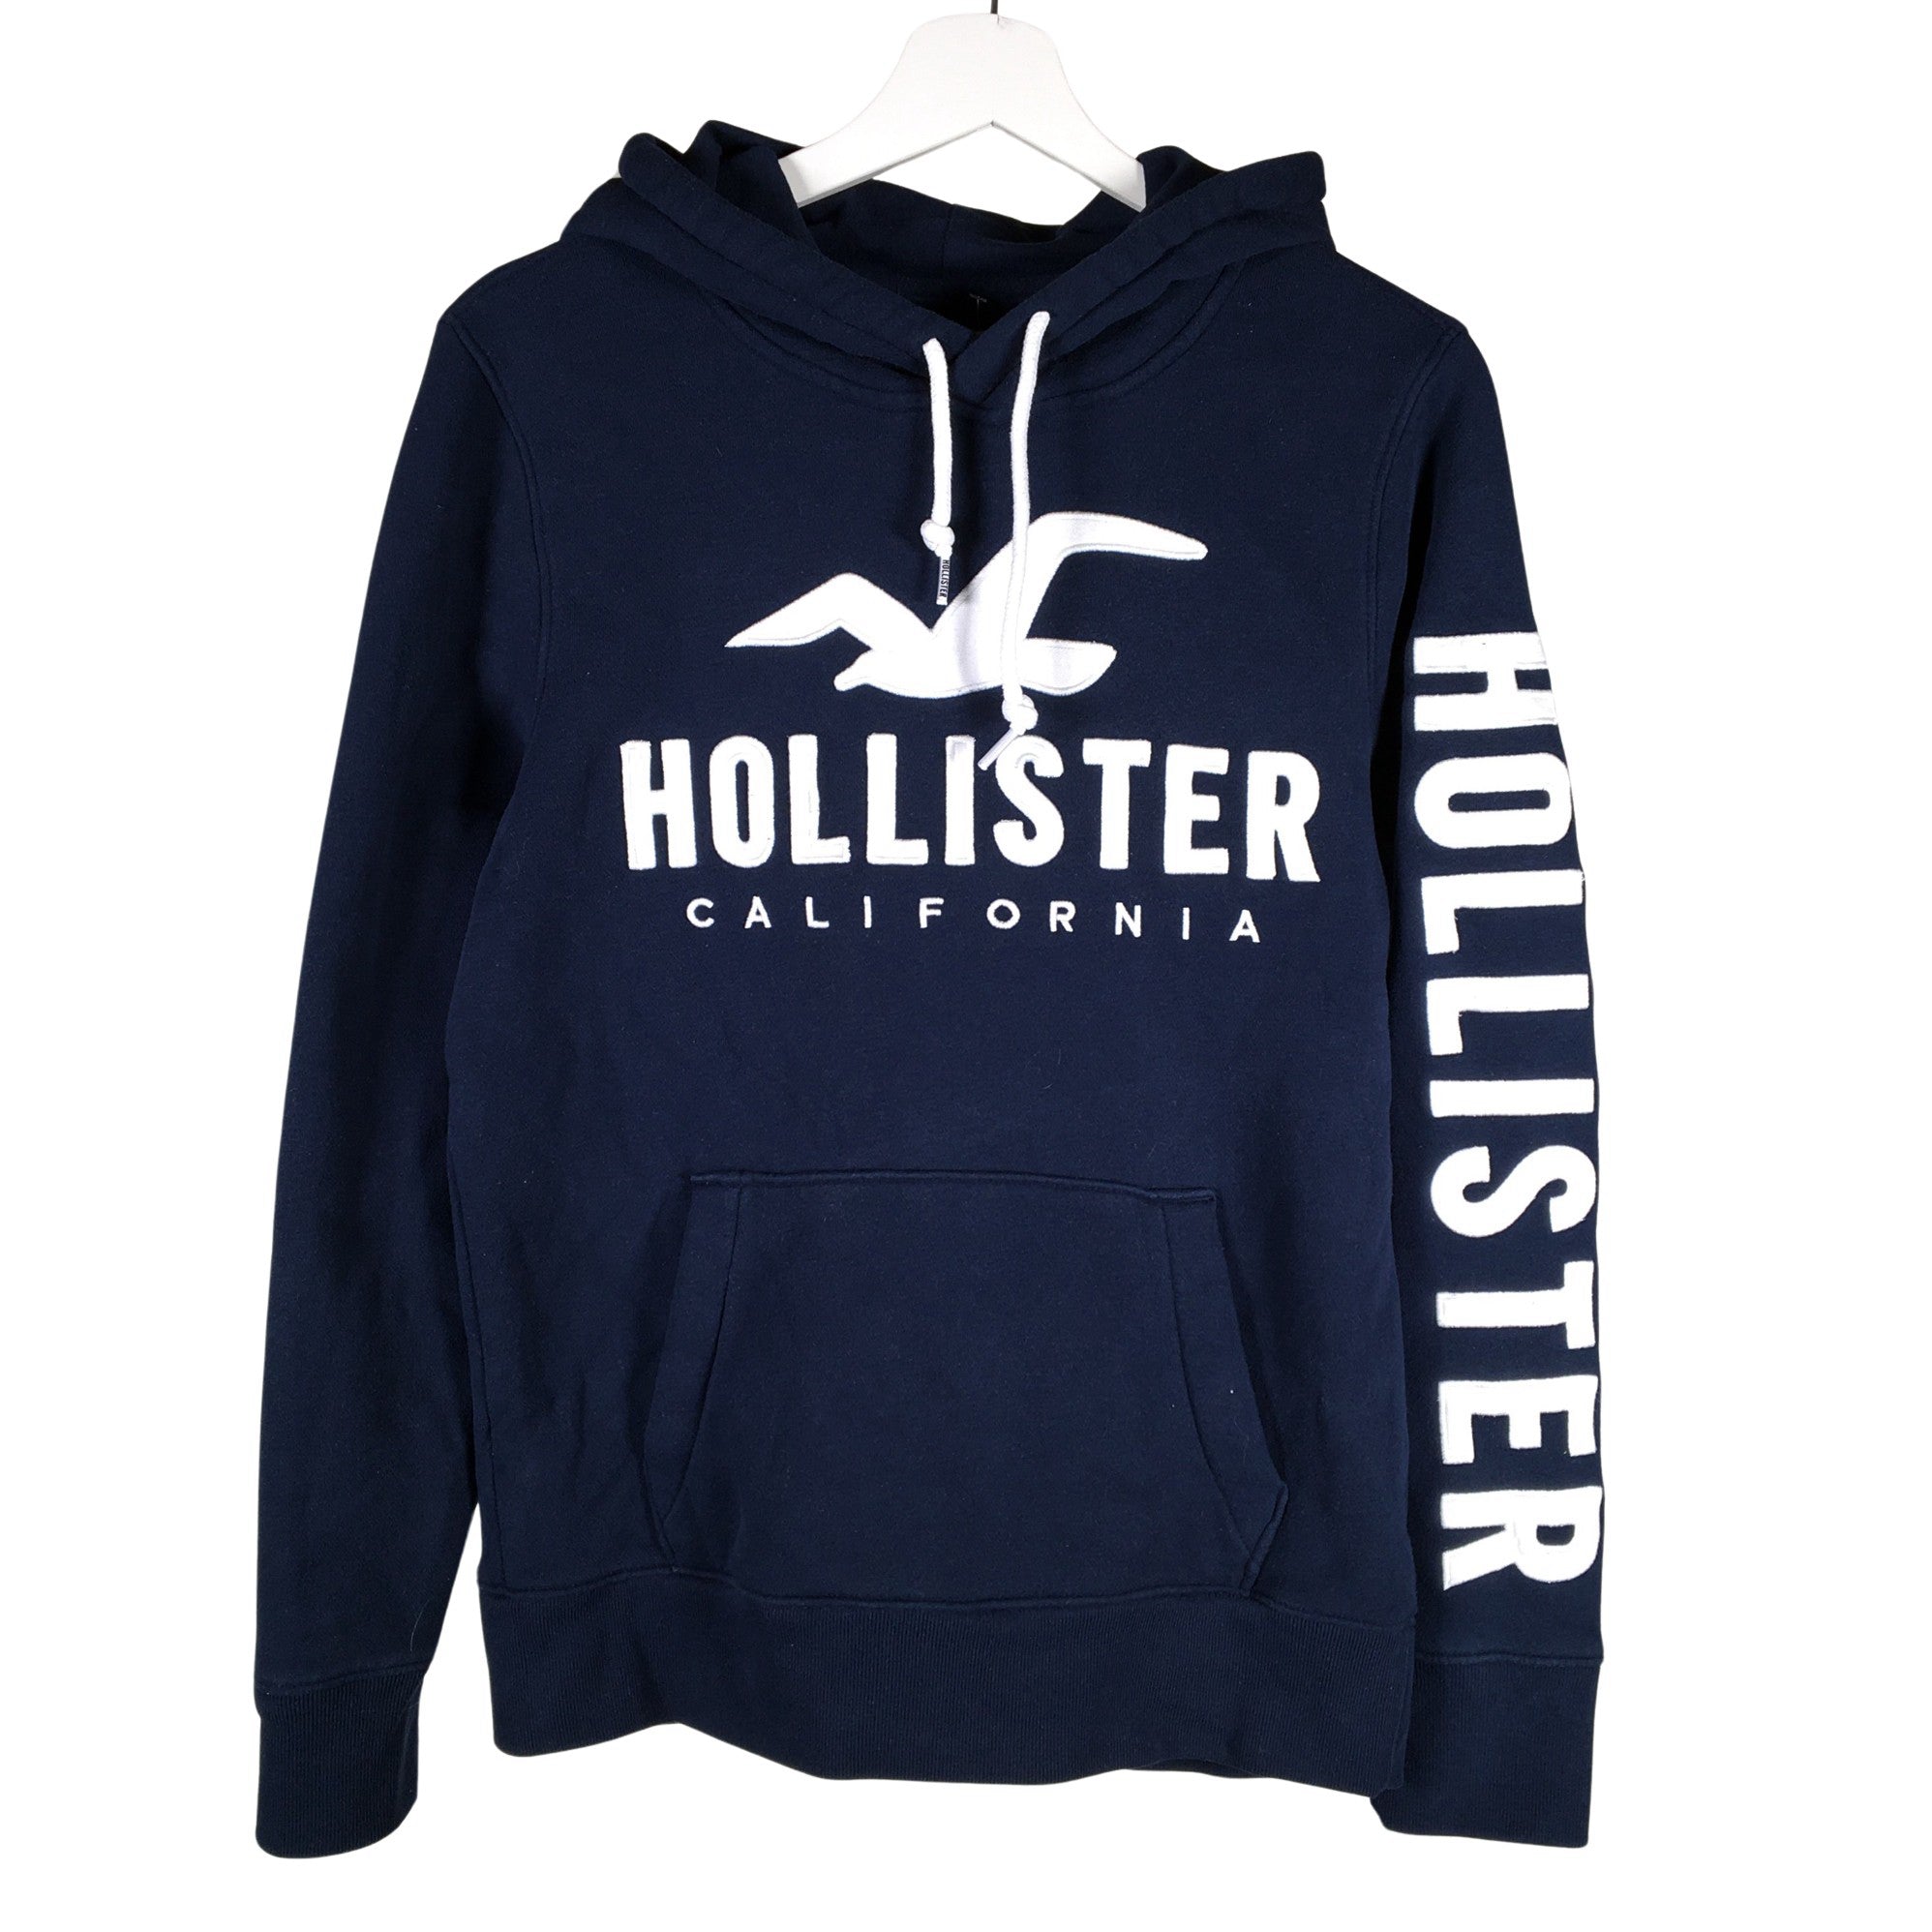 Hollister hoodie in black with chest logo